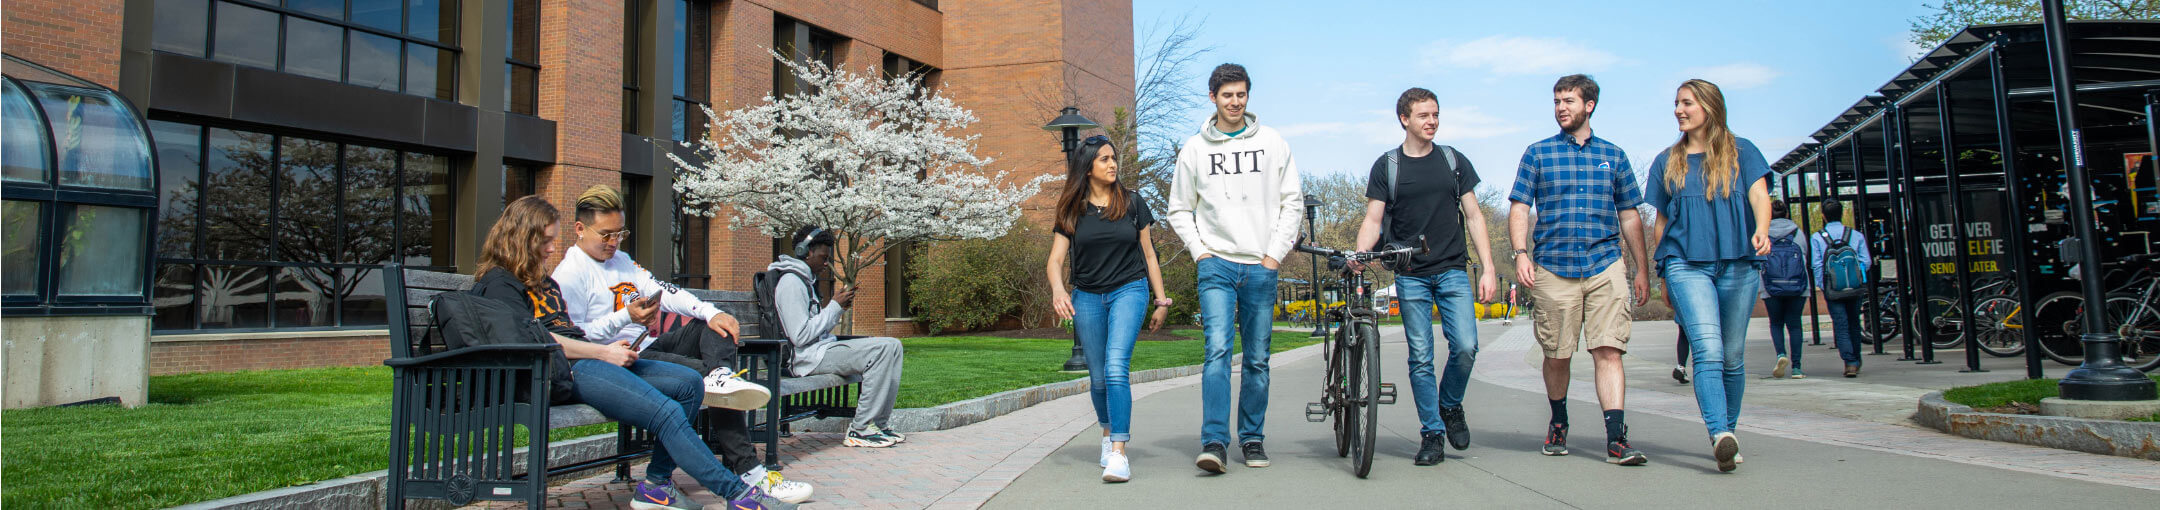 A group of students walking on campus.